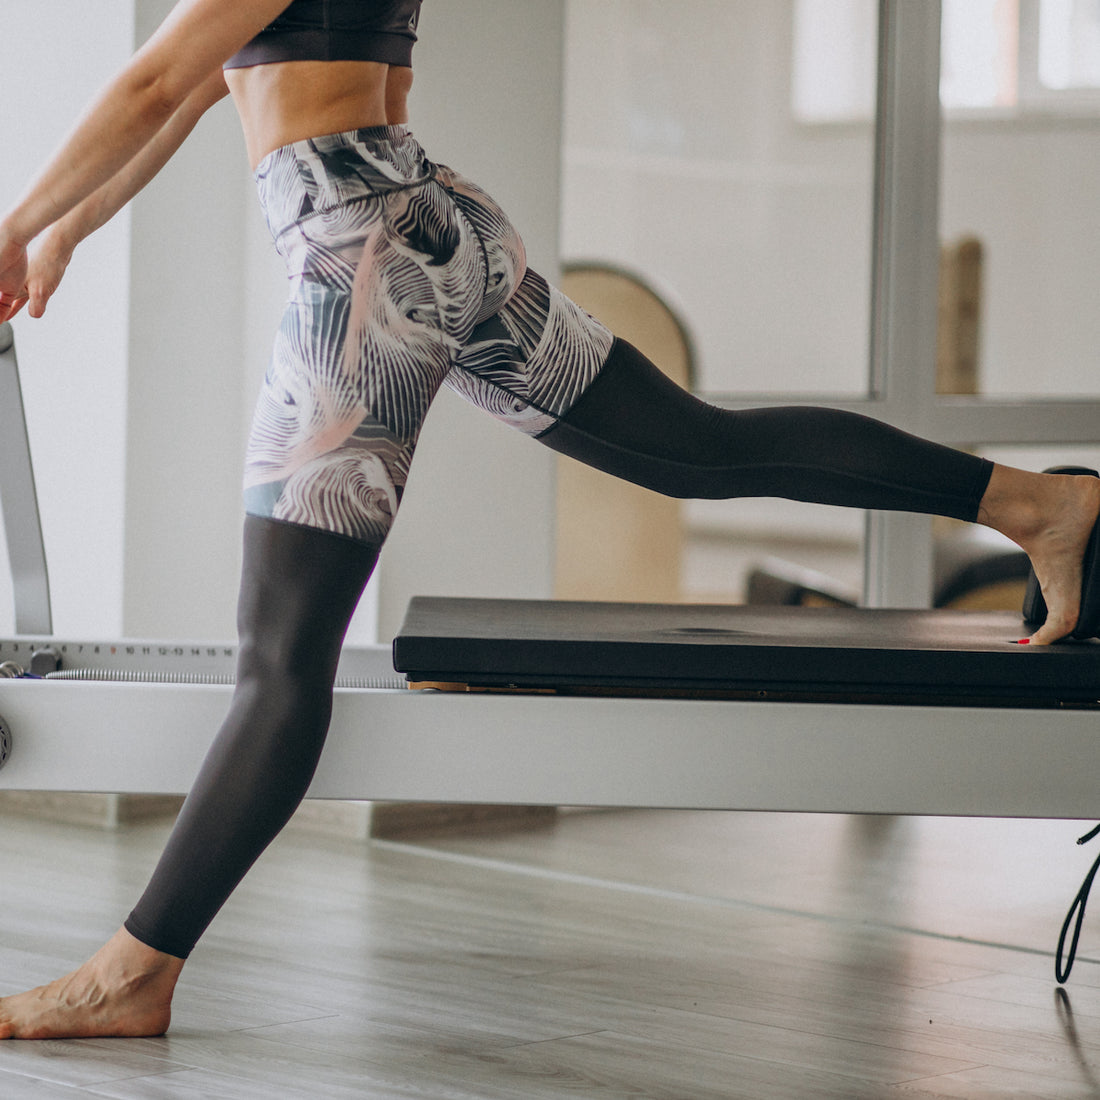 Work Your Glutes: 5 Pilates Exercises For Firmer Glutes